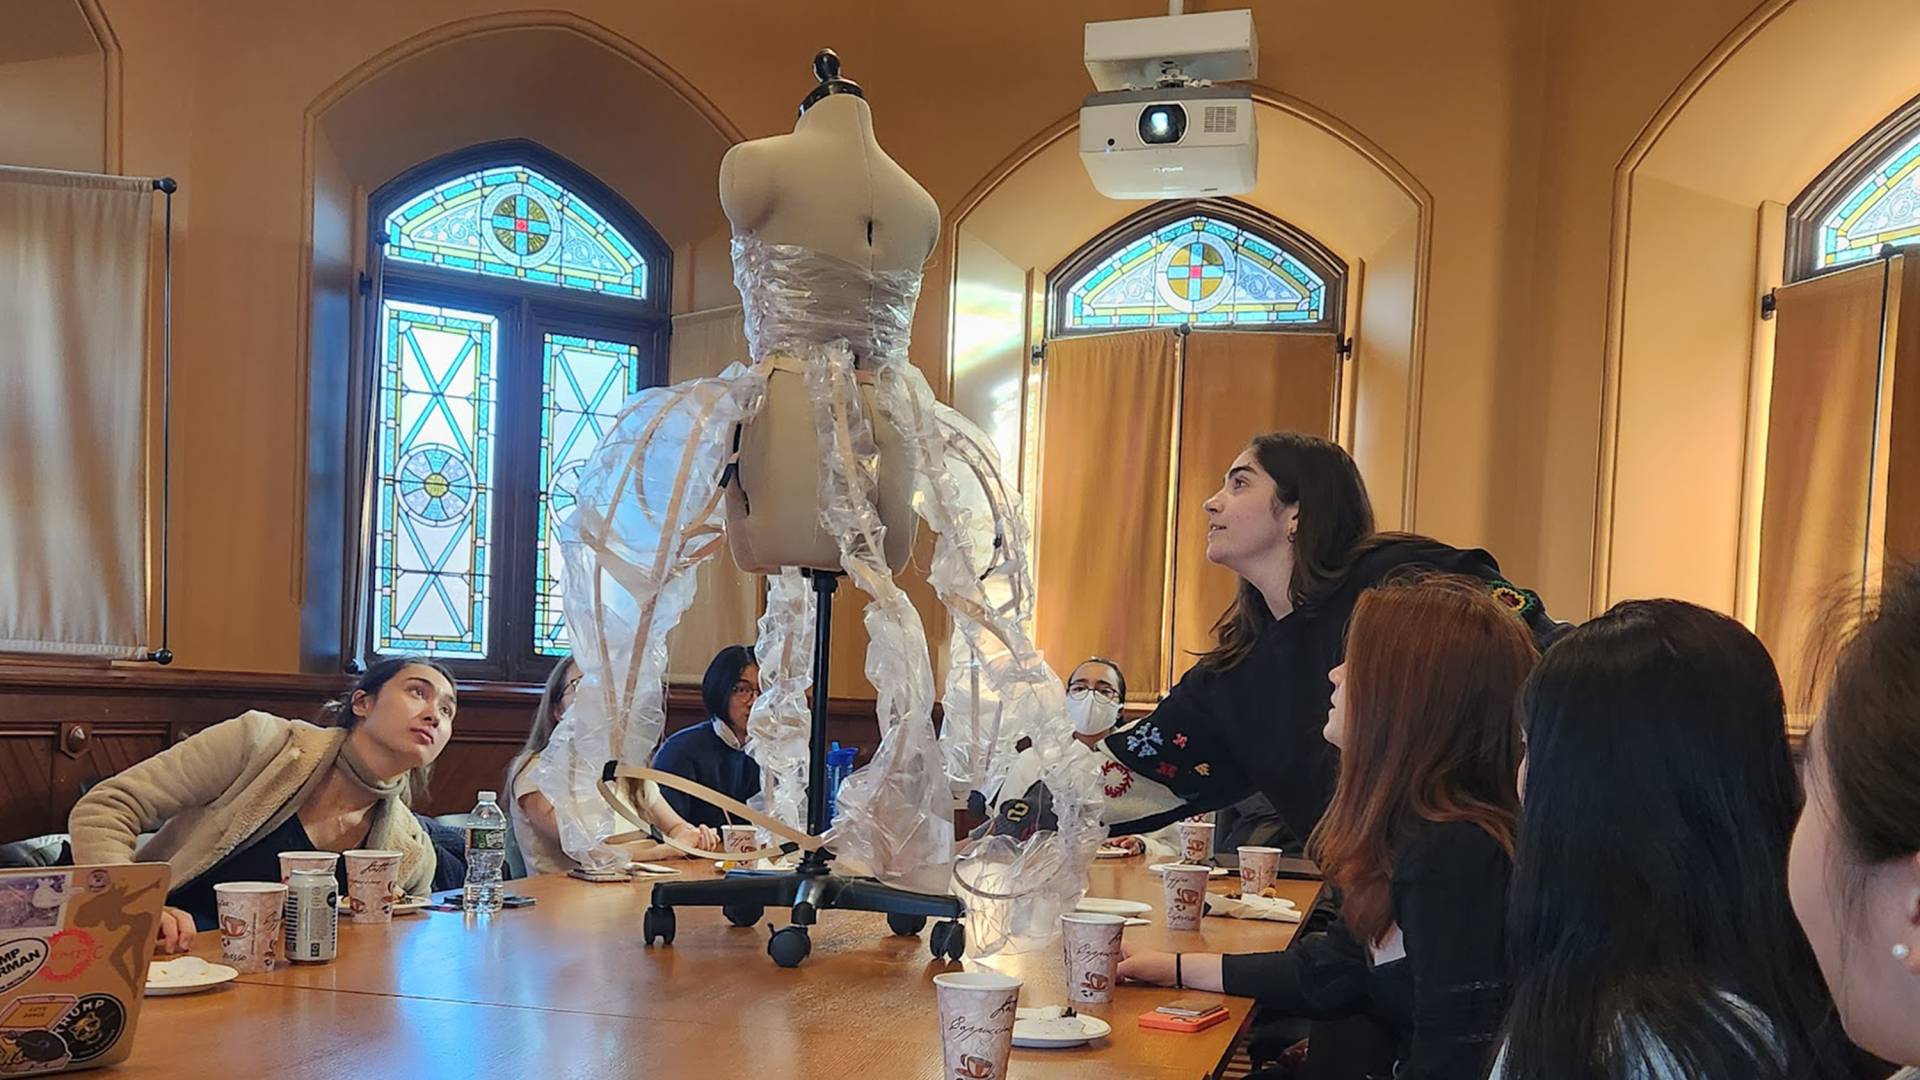 Students discuss a dress on a dress form duing the class